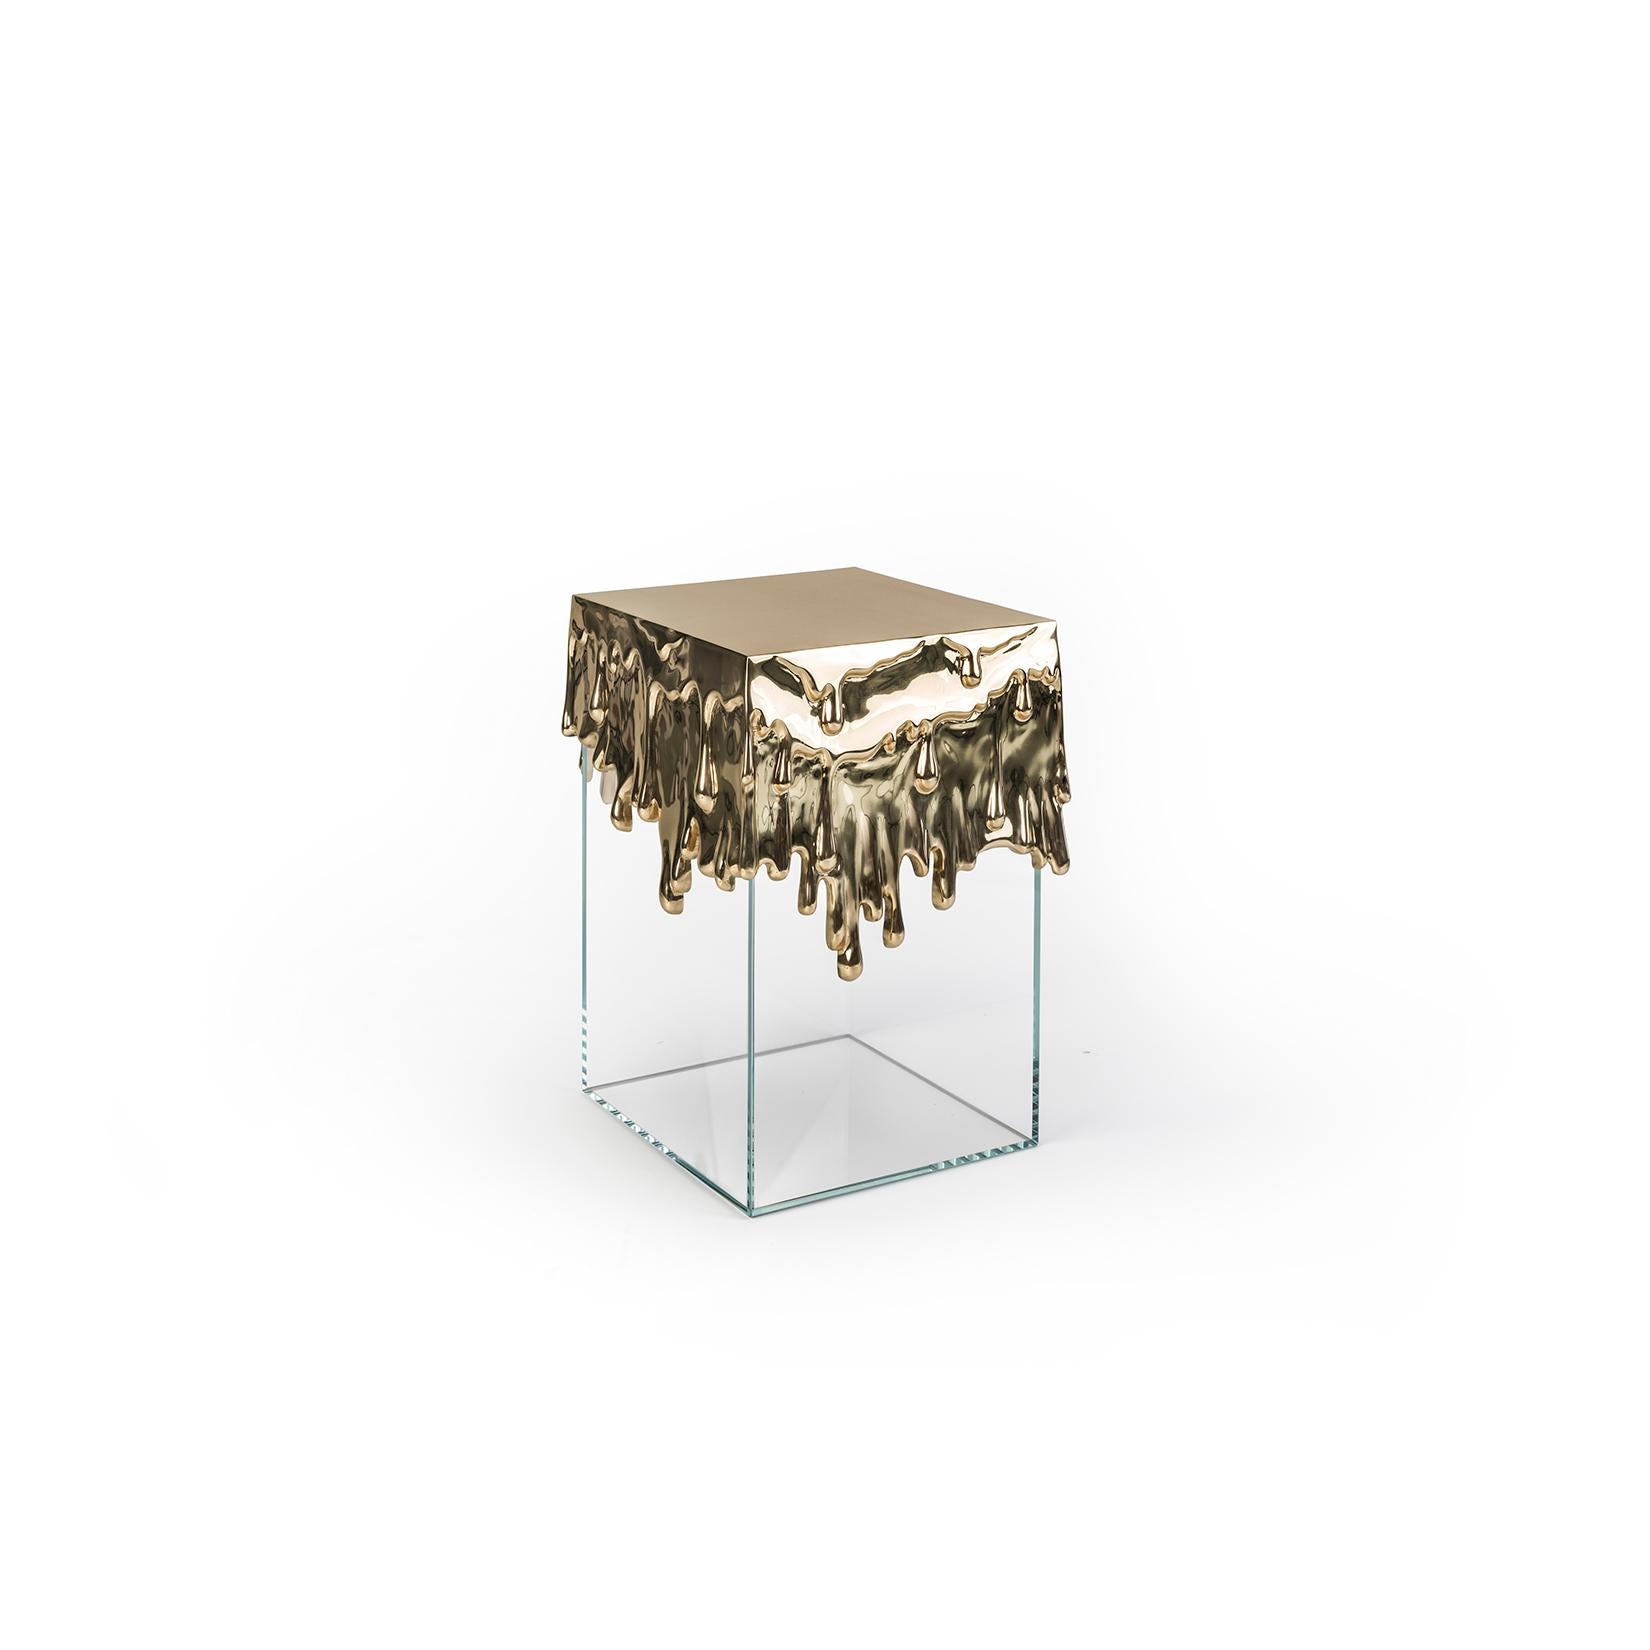 Modern Art Candle Side Table in Polished Brass Cast and Glass Base, Metal Work In New Condition For Sale In Oporto, PT